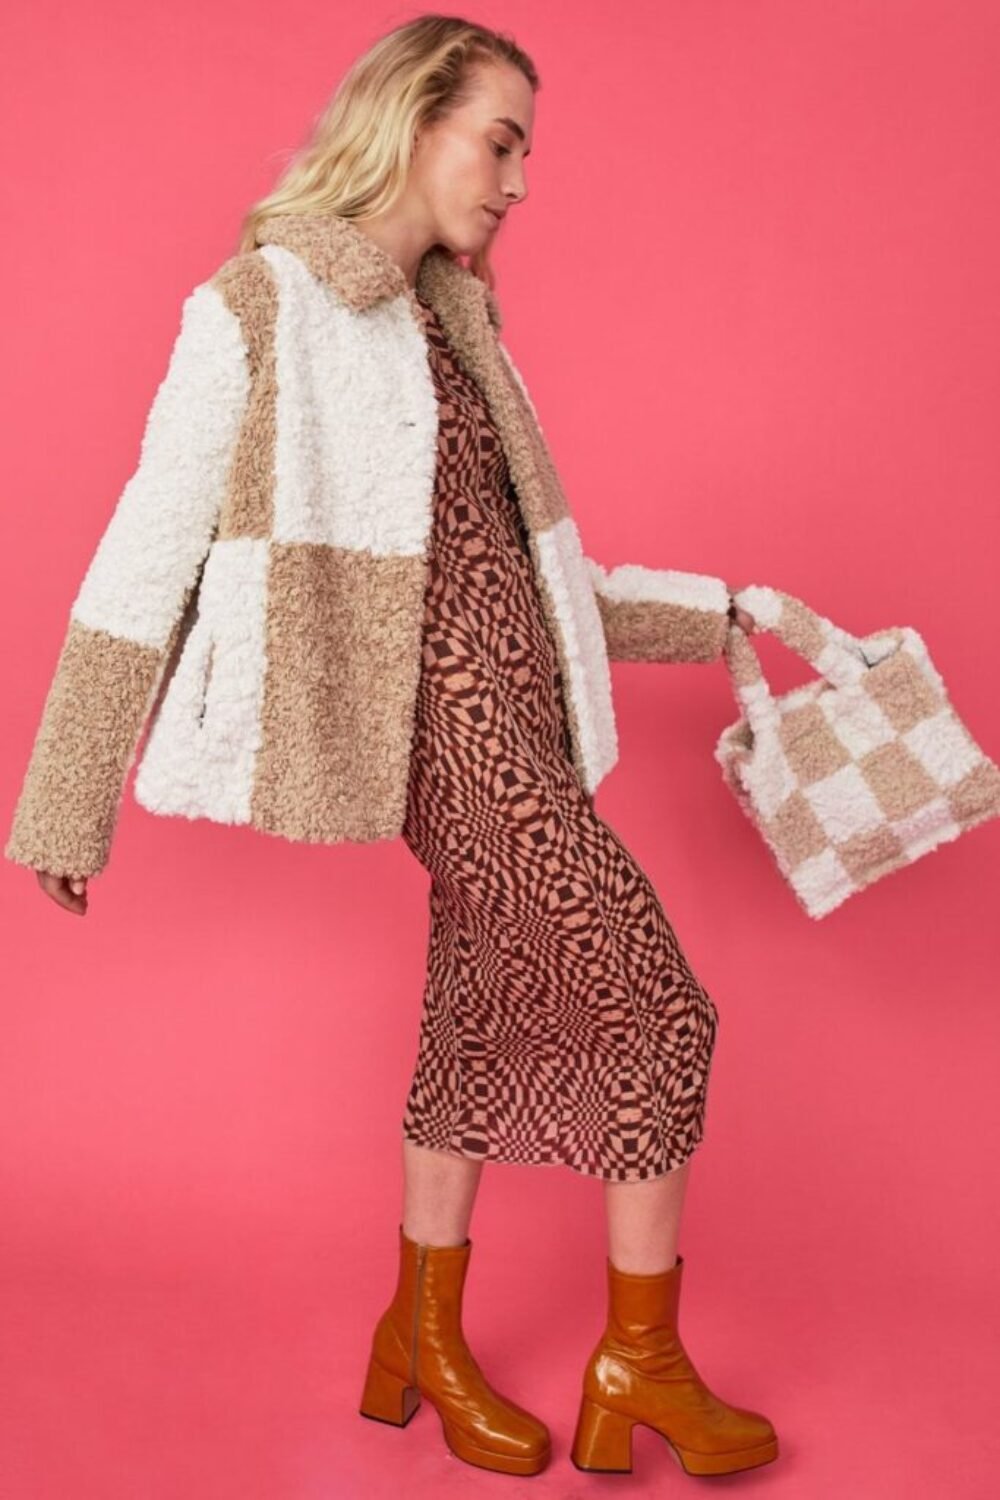 Shop Lux Mocha and Cream Faux Shearling Checkered Oversized Coat and women's luxury and designer clothes at www.lux-apparel.co.uk